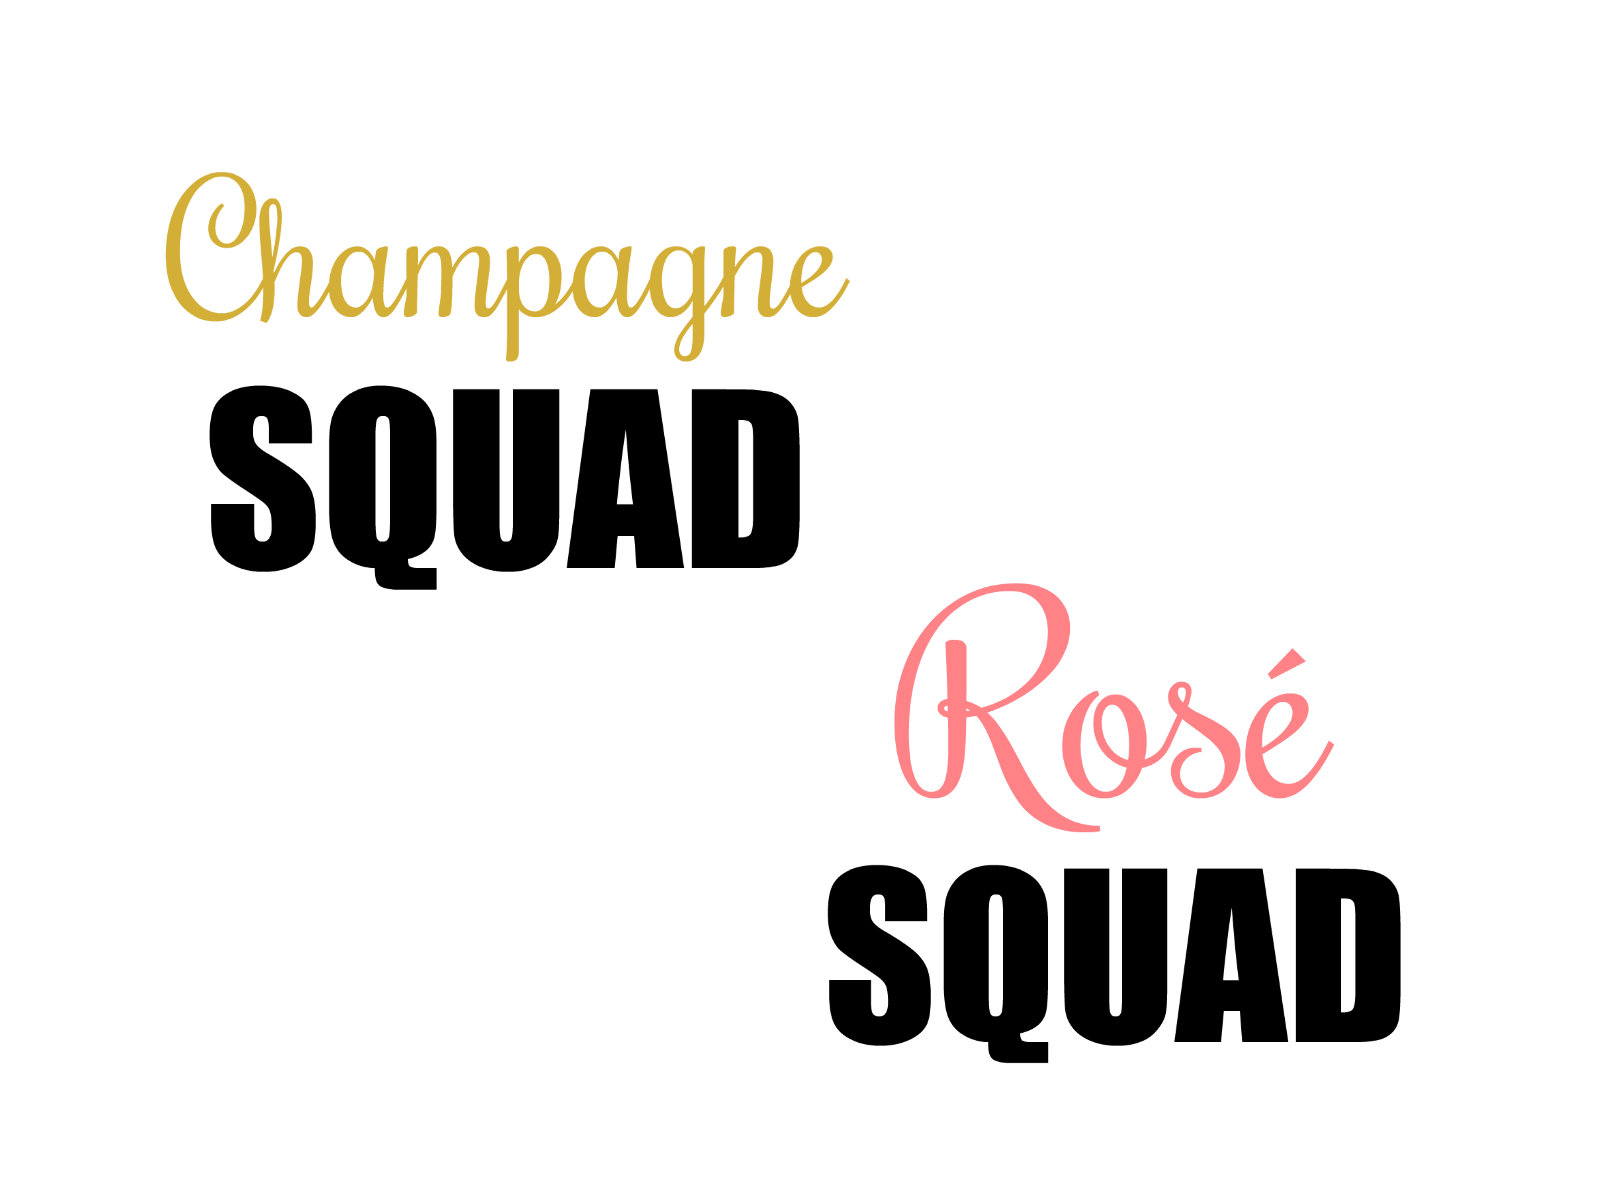  Pull out your Cricut or Silhouette and get crafting with these fun SVG Files! These free Champagne Squad and Rosé Squad cut files are too cute! Perfect for New Year's Eve with girlfriends or DIY bachelorette party shirts! Makes and easy handmade bridal party gift idea too! #Cricut #Silhouette #SVGFiles #FreeSVG #NewYearsEve